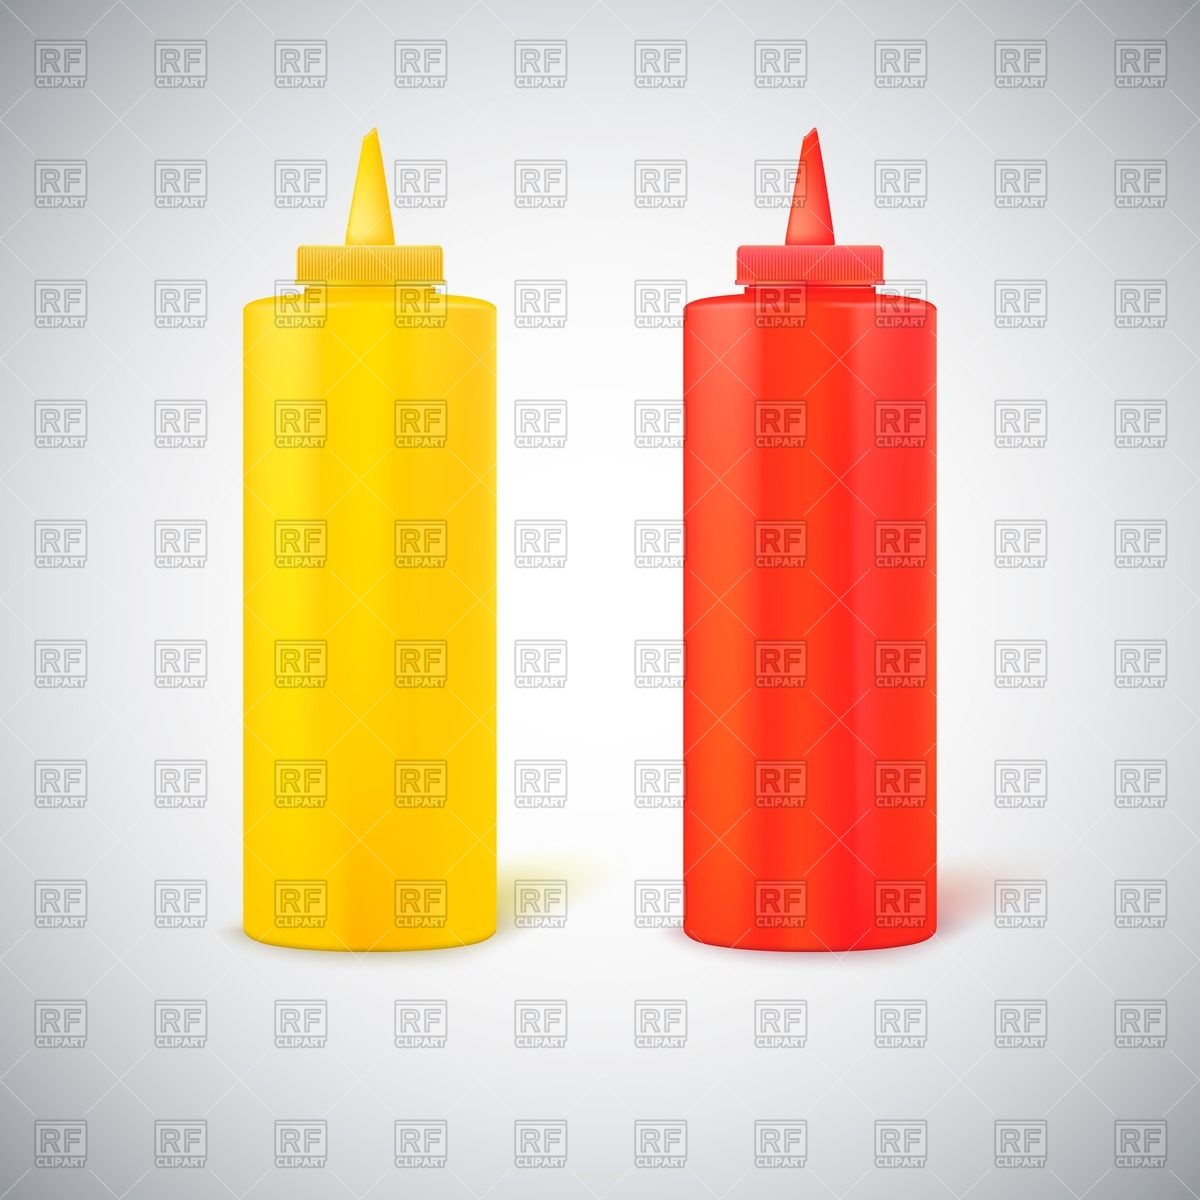 Of Mustard And Ketchup Download Royalty Free Vector Clipart  Eps